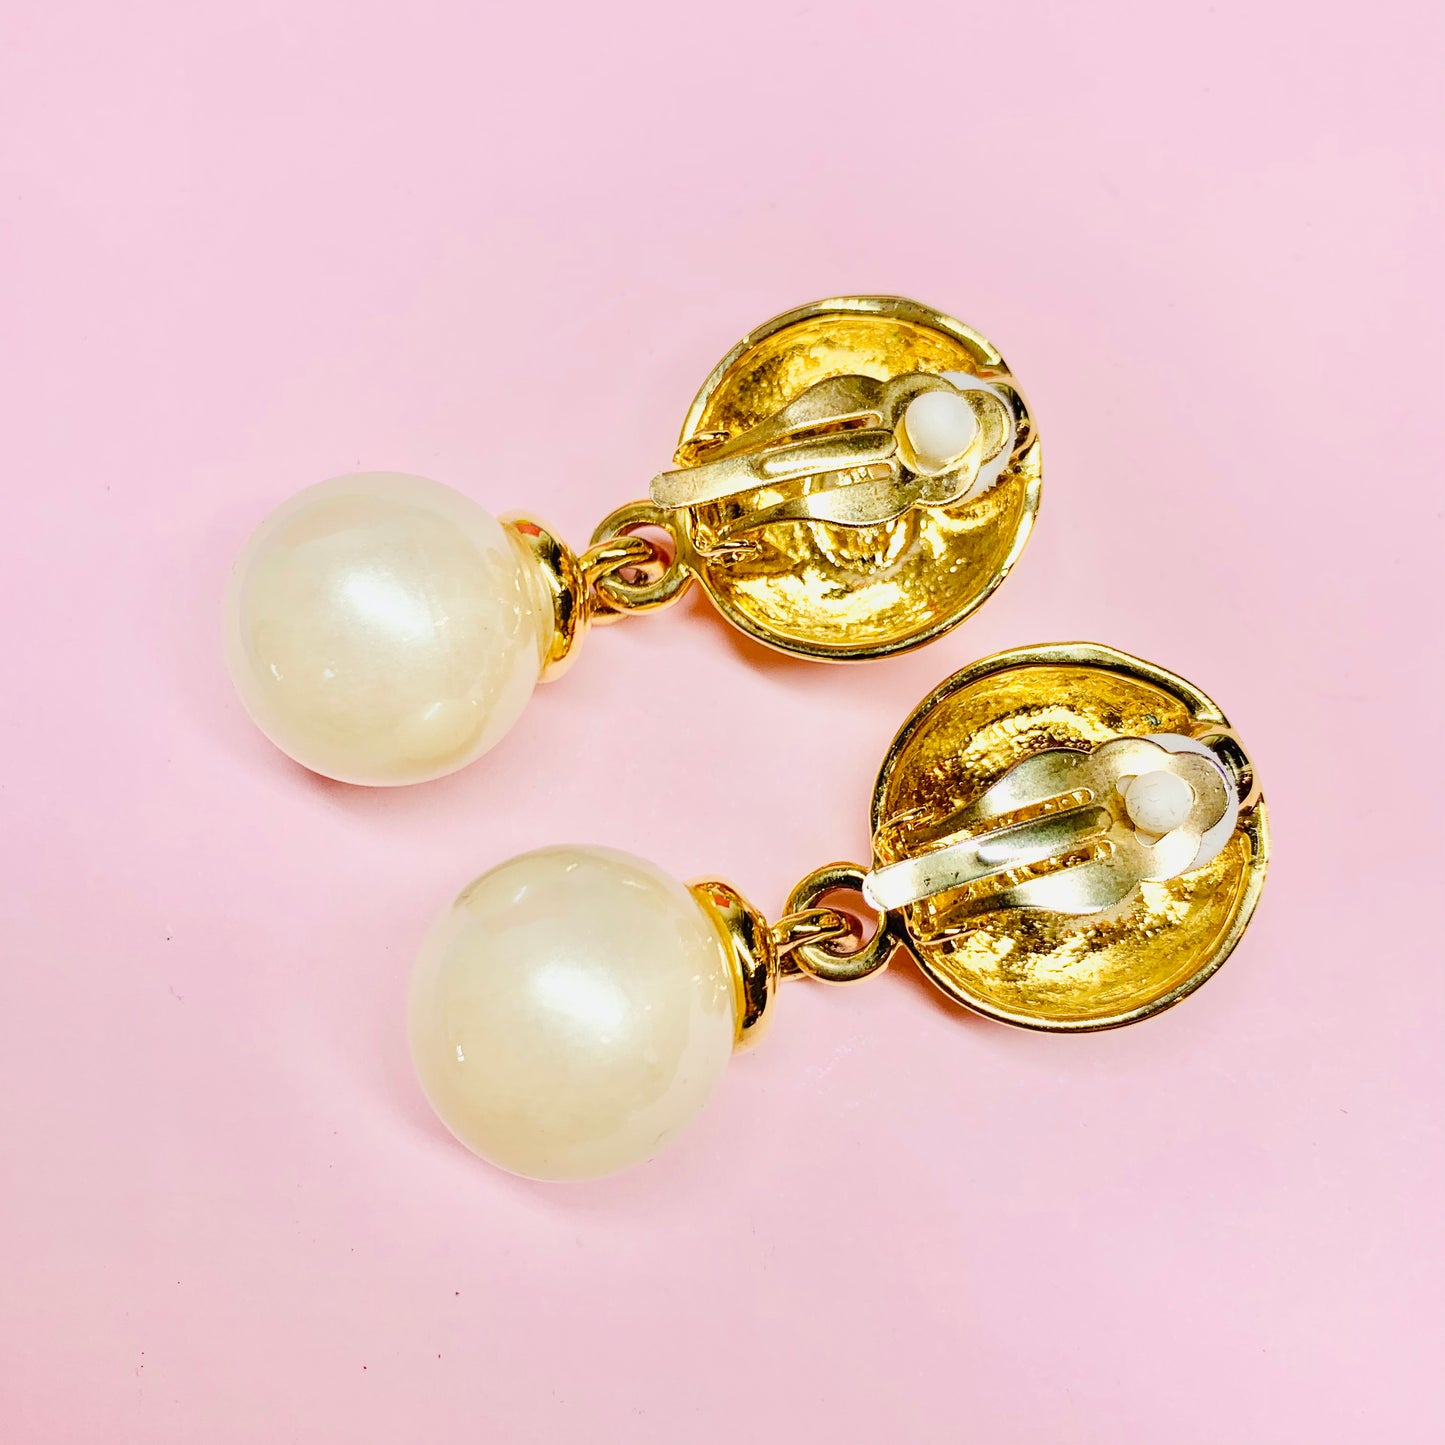 Rare 1980s gold plated pearl drop earrings with pearls